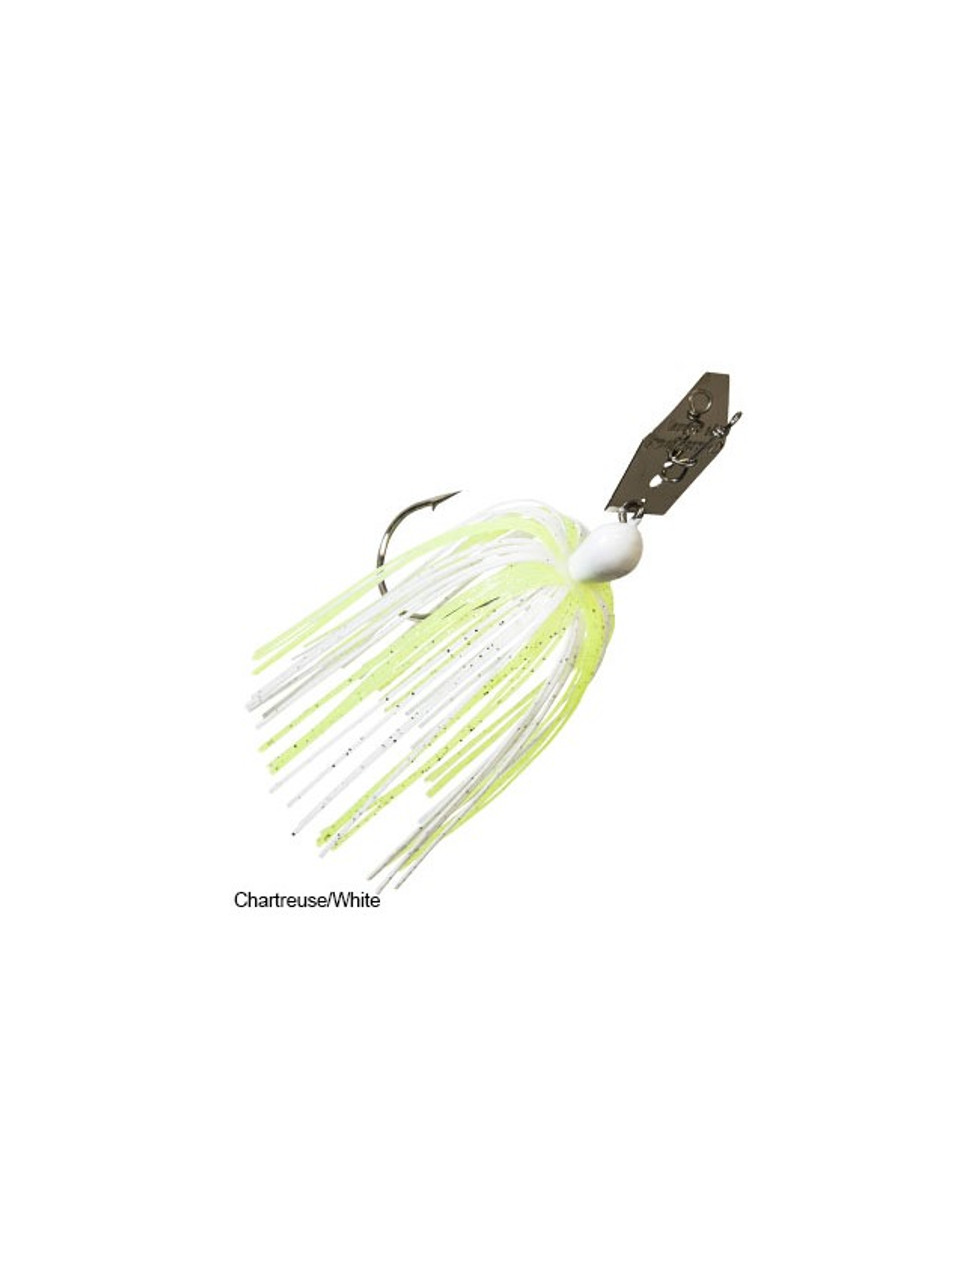 Z Man Original Chatterbait - 1/4oz Chartreuse/White - The Harbour Chandler